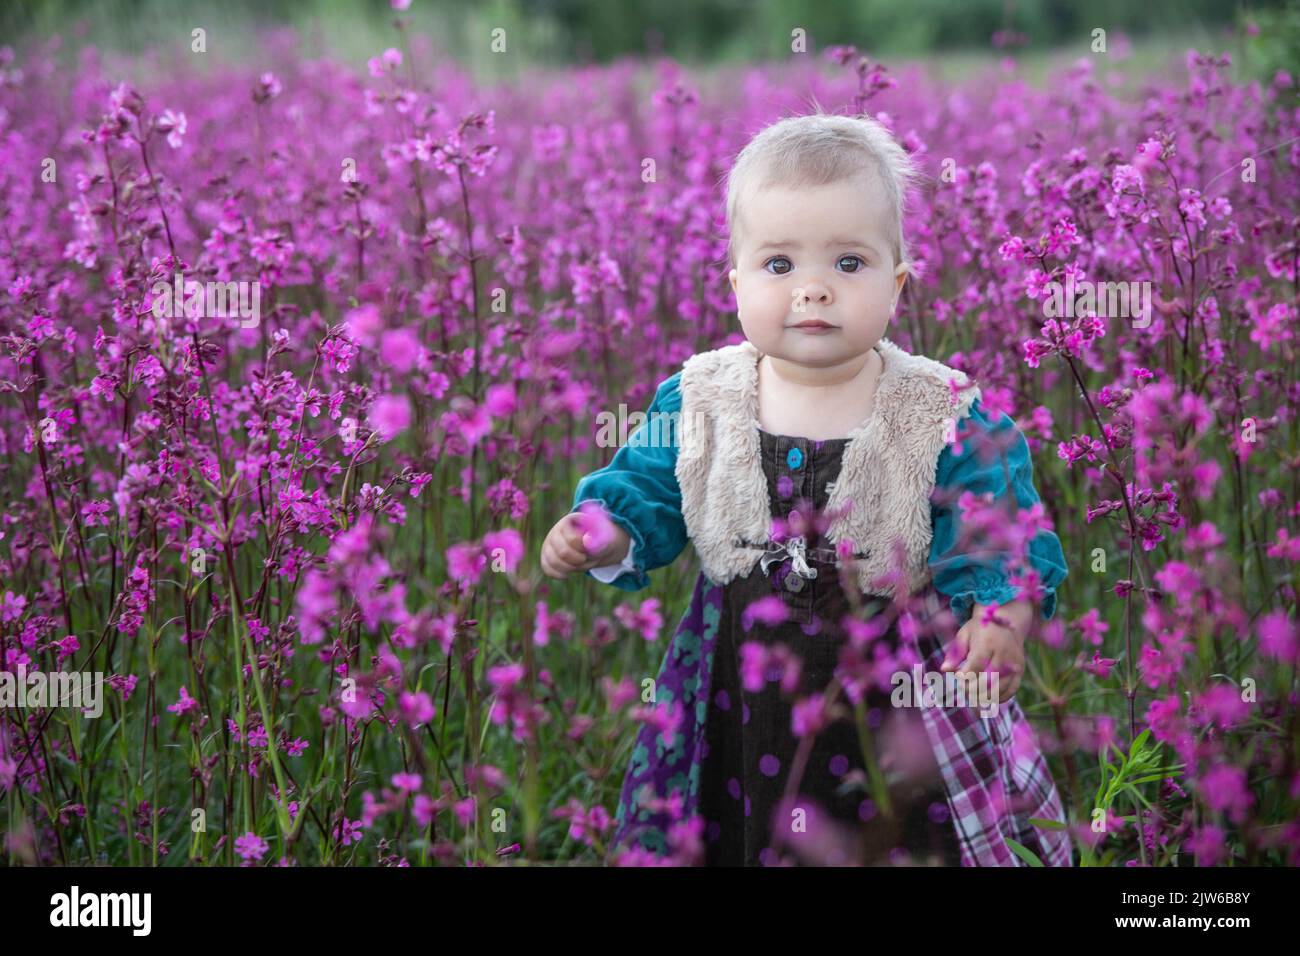 baby in a colored dress in a field with purple flowers Stock Photo